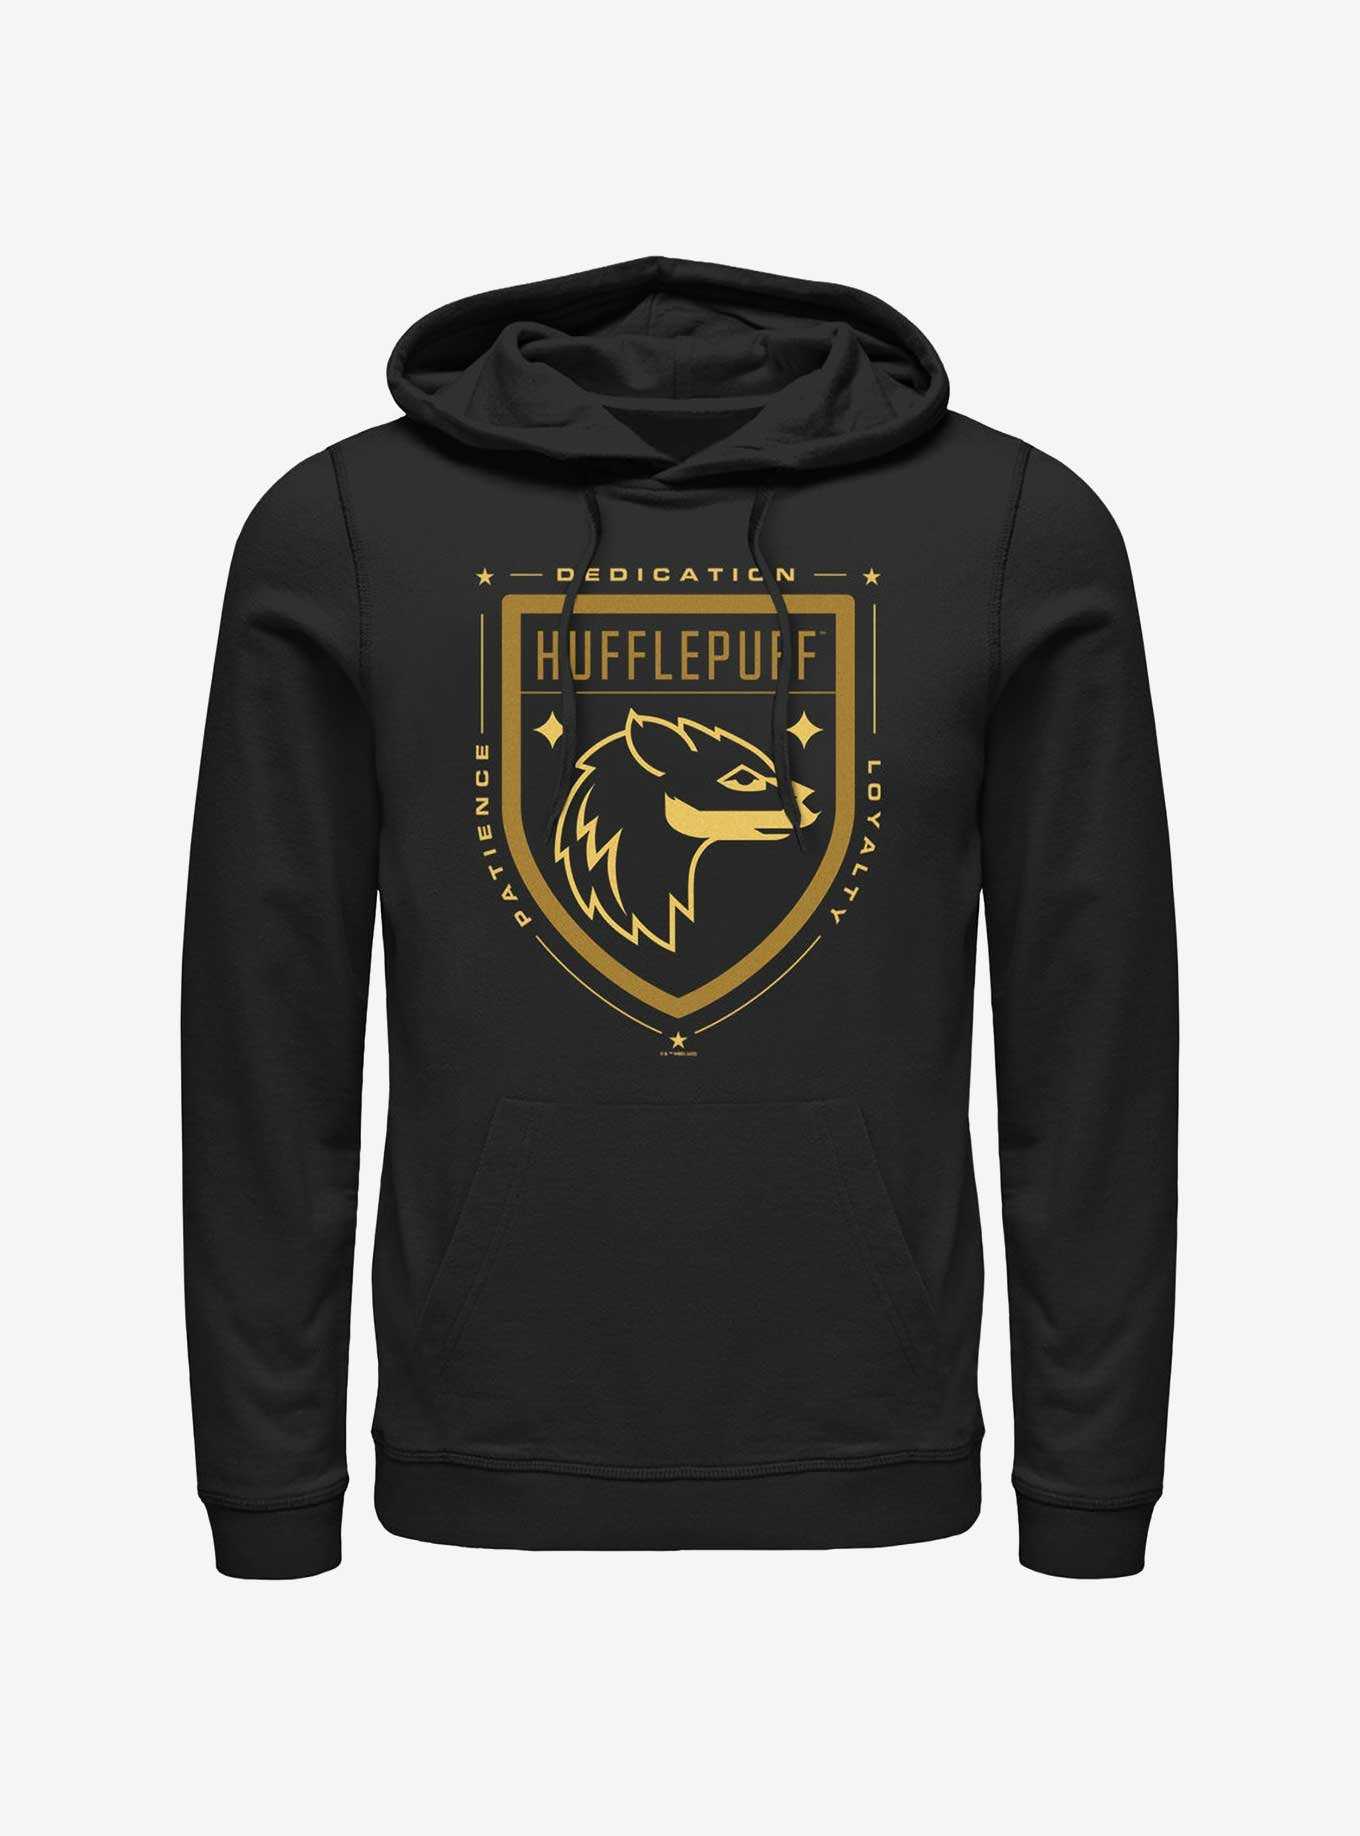 Harry Potter Hufflepuff House Crest Hoodie, , hi-res